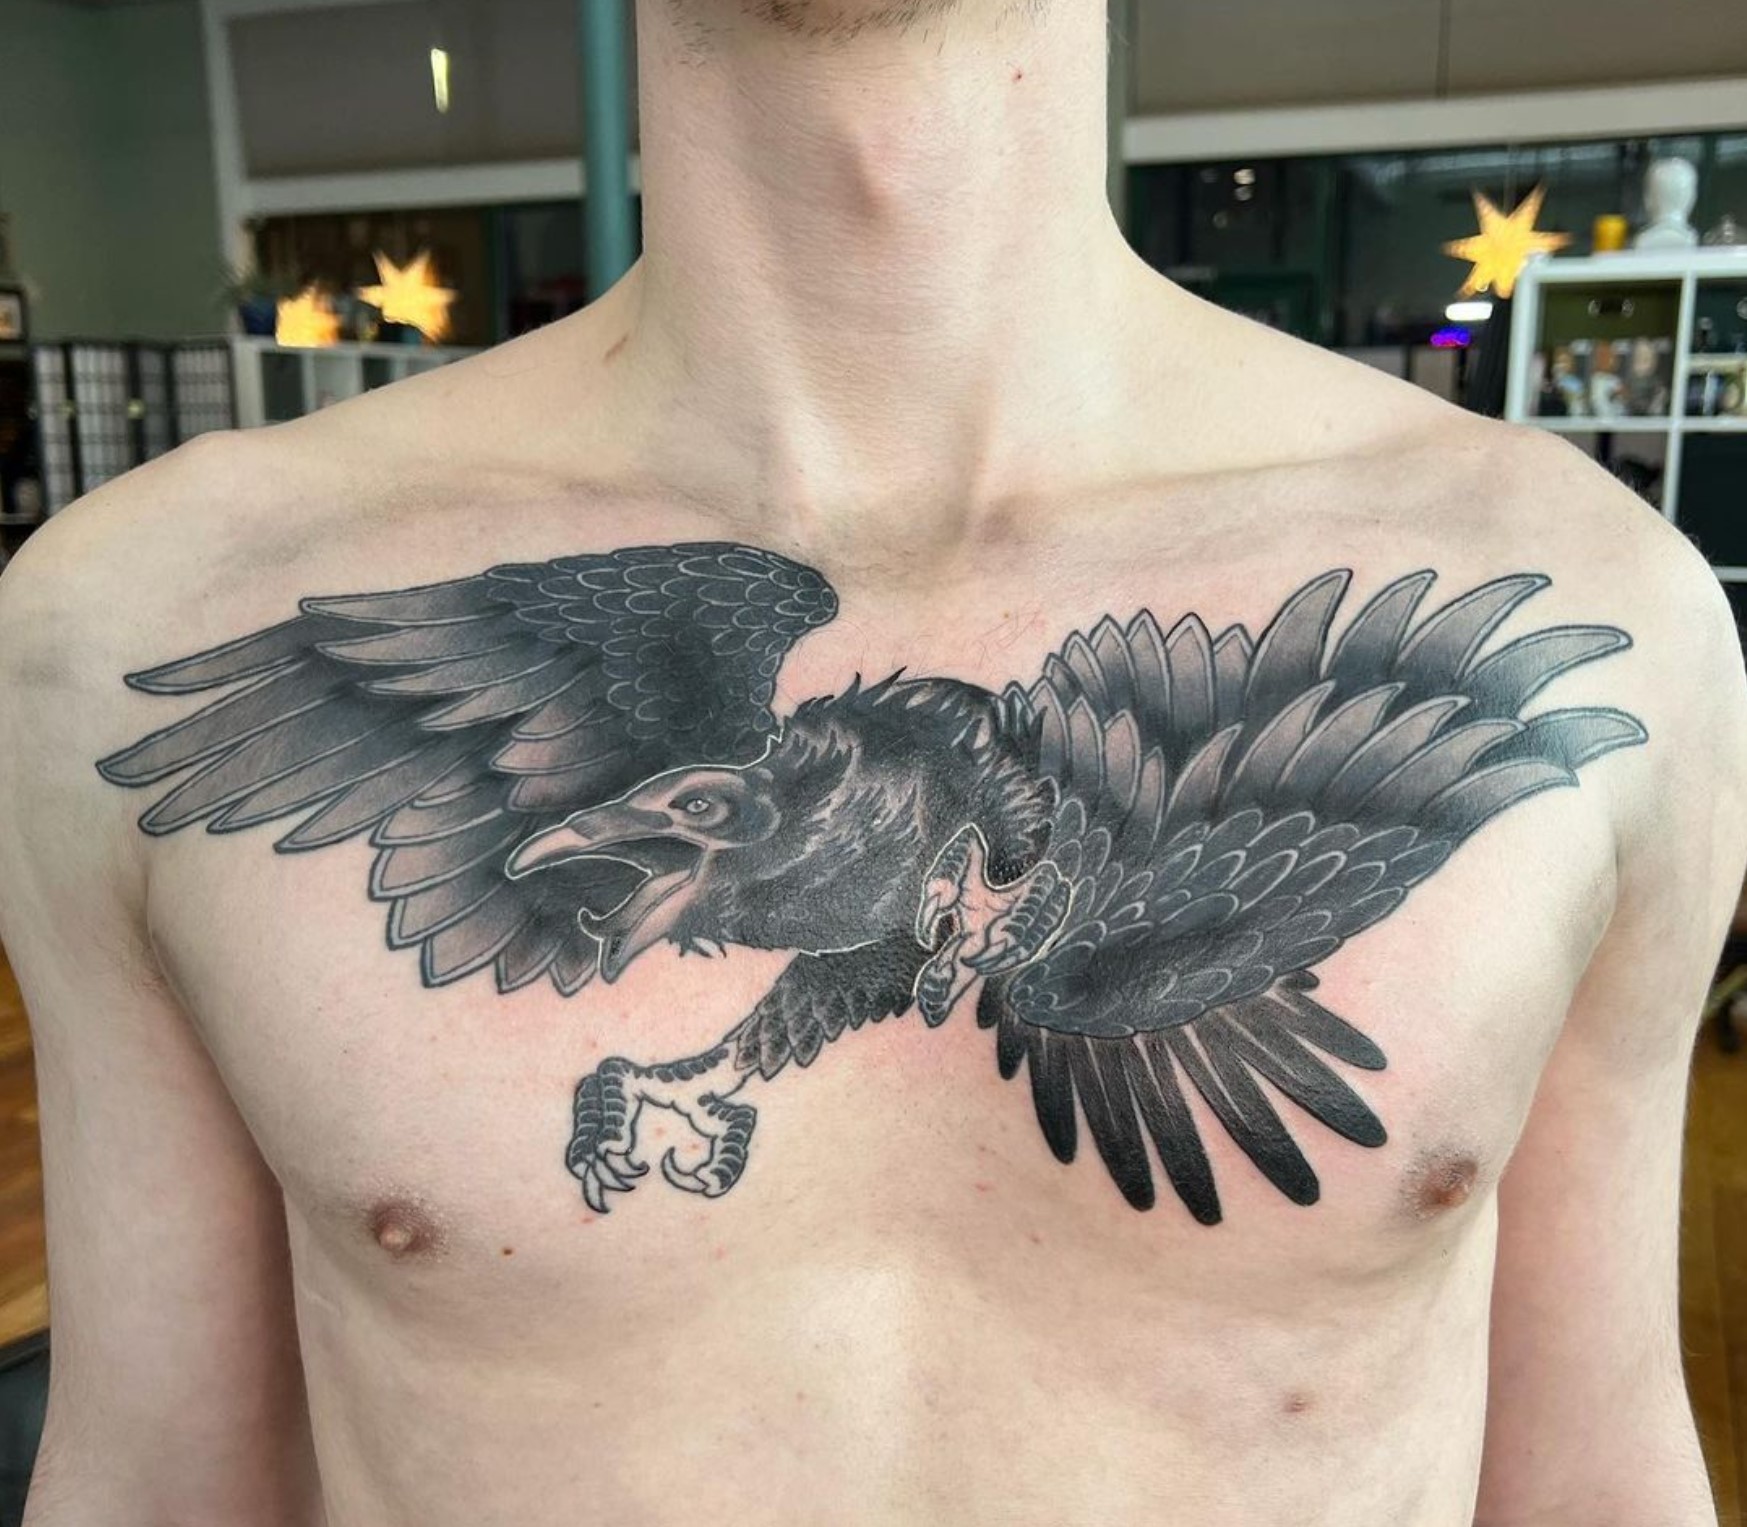 101 Amazing Crow Tattoo Designs You Need To See! | Outsons | Men's Fashion  Tips And Style Guide For 2020 | Crow tattoo, Black crow tattoos, Tattoos  with meaning